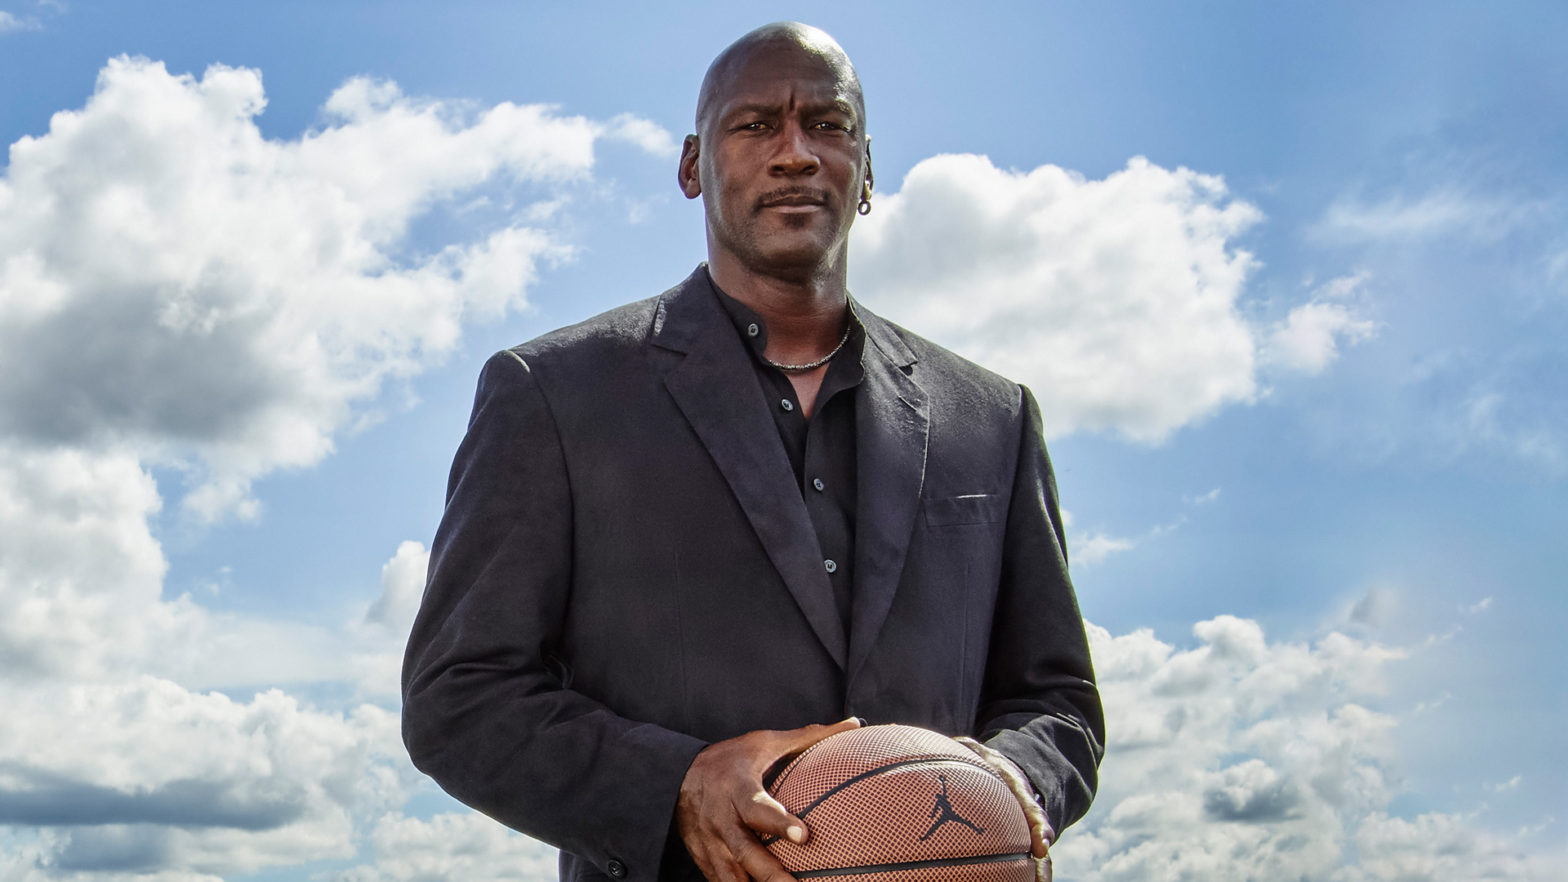 The Jordan Brand Reaching $5B In Annual Revenue Is Proof That Michael Jordan's Legacy Will Live Forever